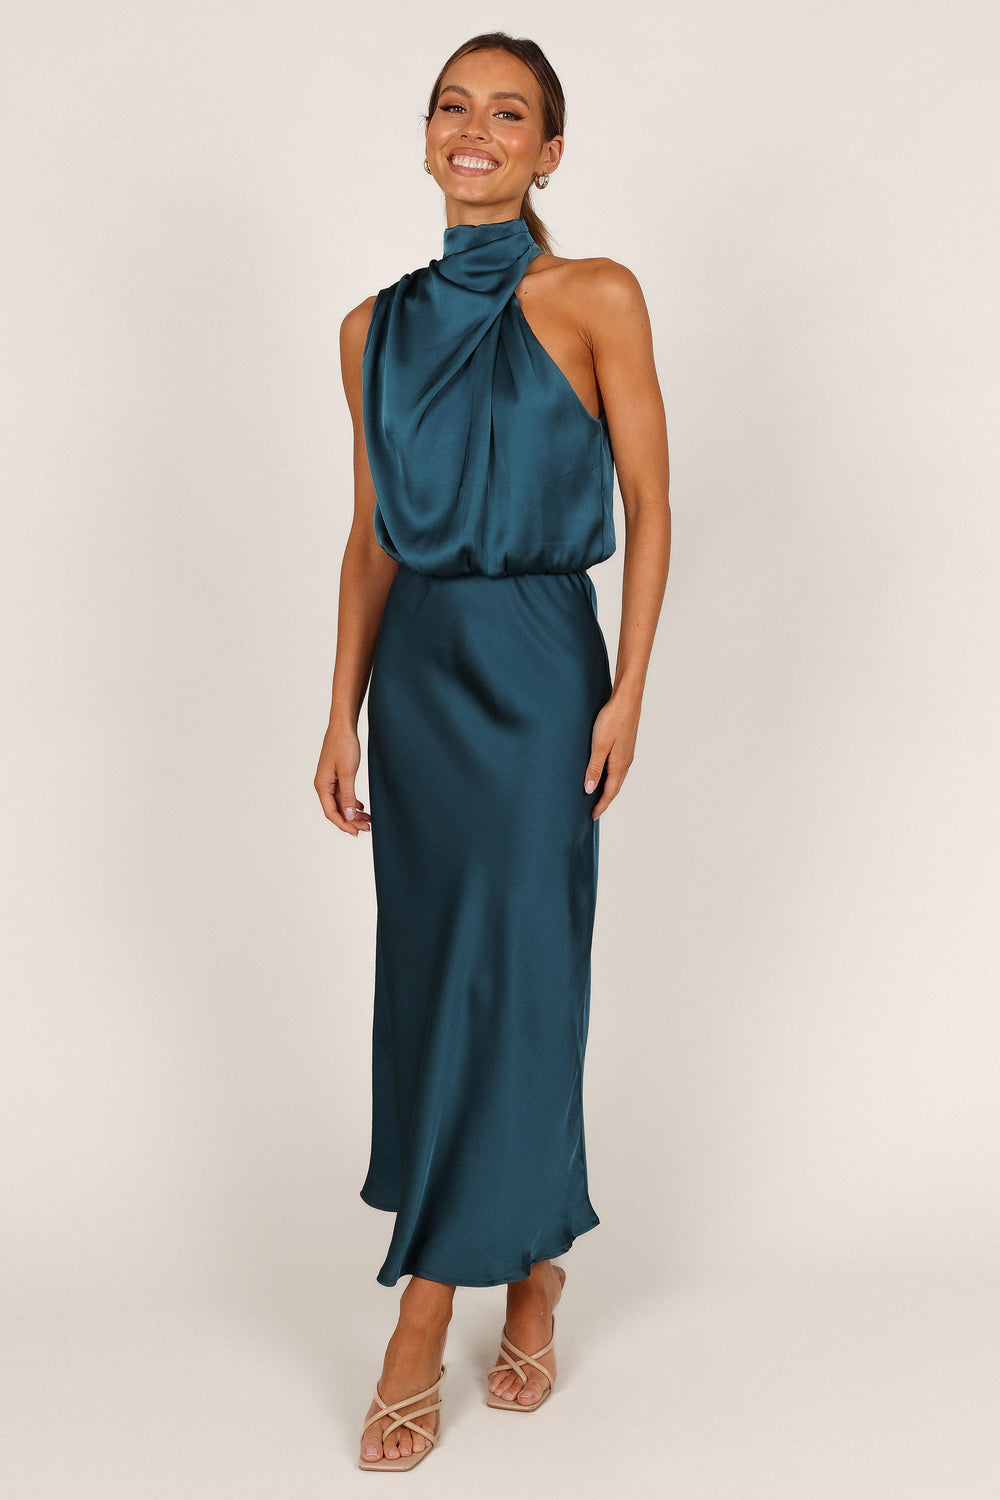 Petal and Pup USA DRESSES Anabelle Halter Neck Maxi Dress - Teal